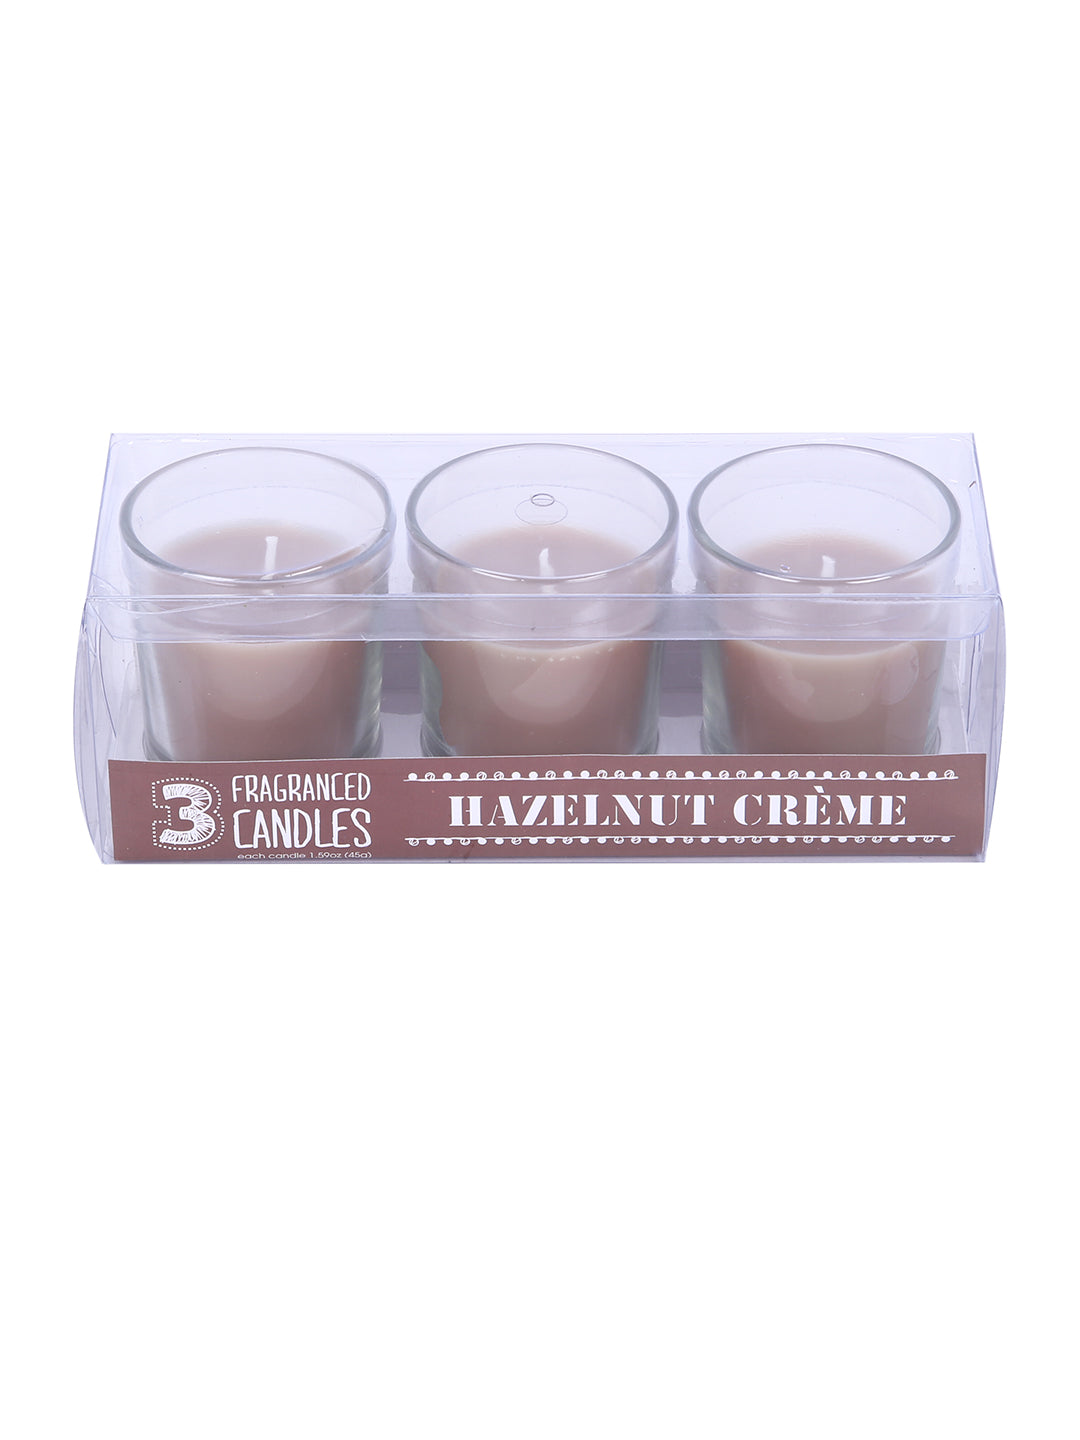 Set of 3 Hosley® Highly Fragranced Hazelnut Creme Filled Glass Candles, 1.6 Oz wax each